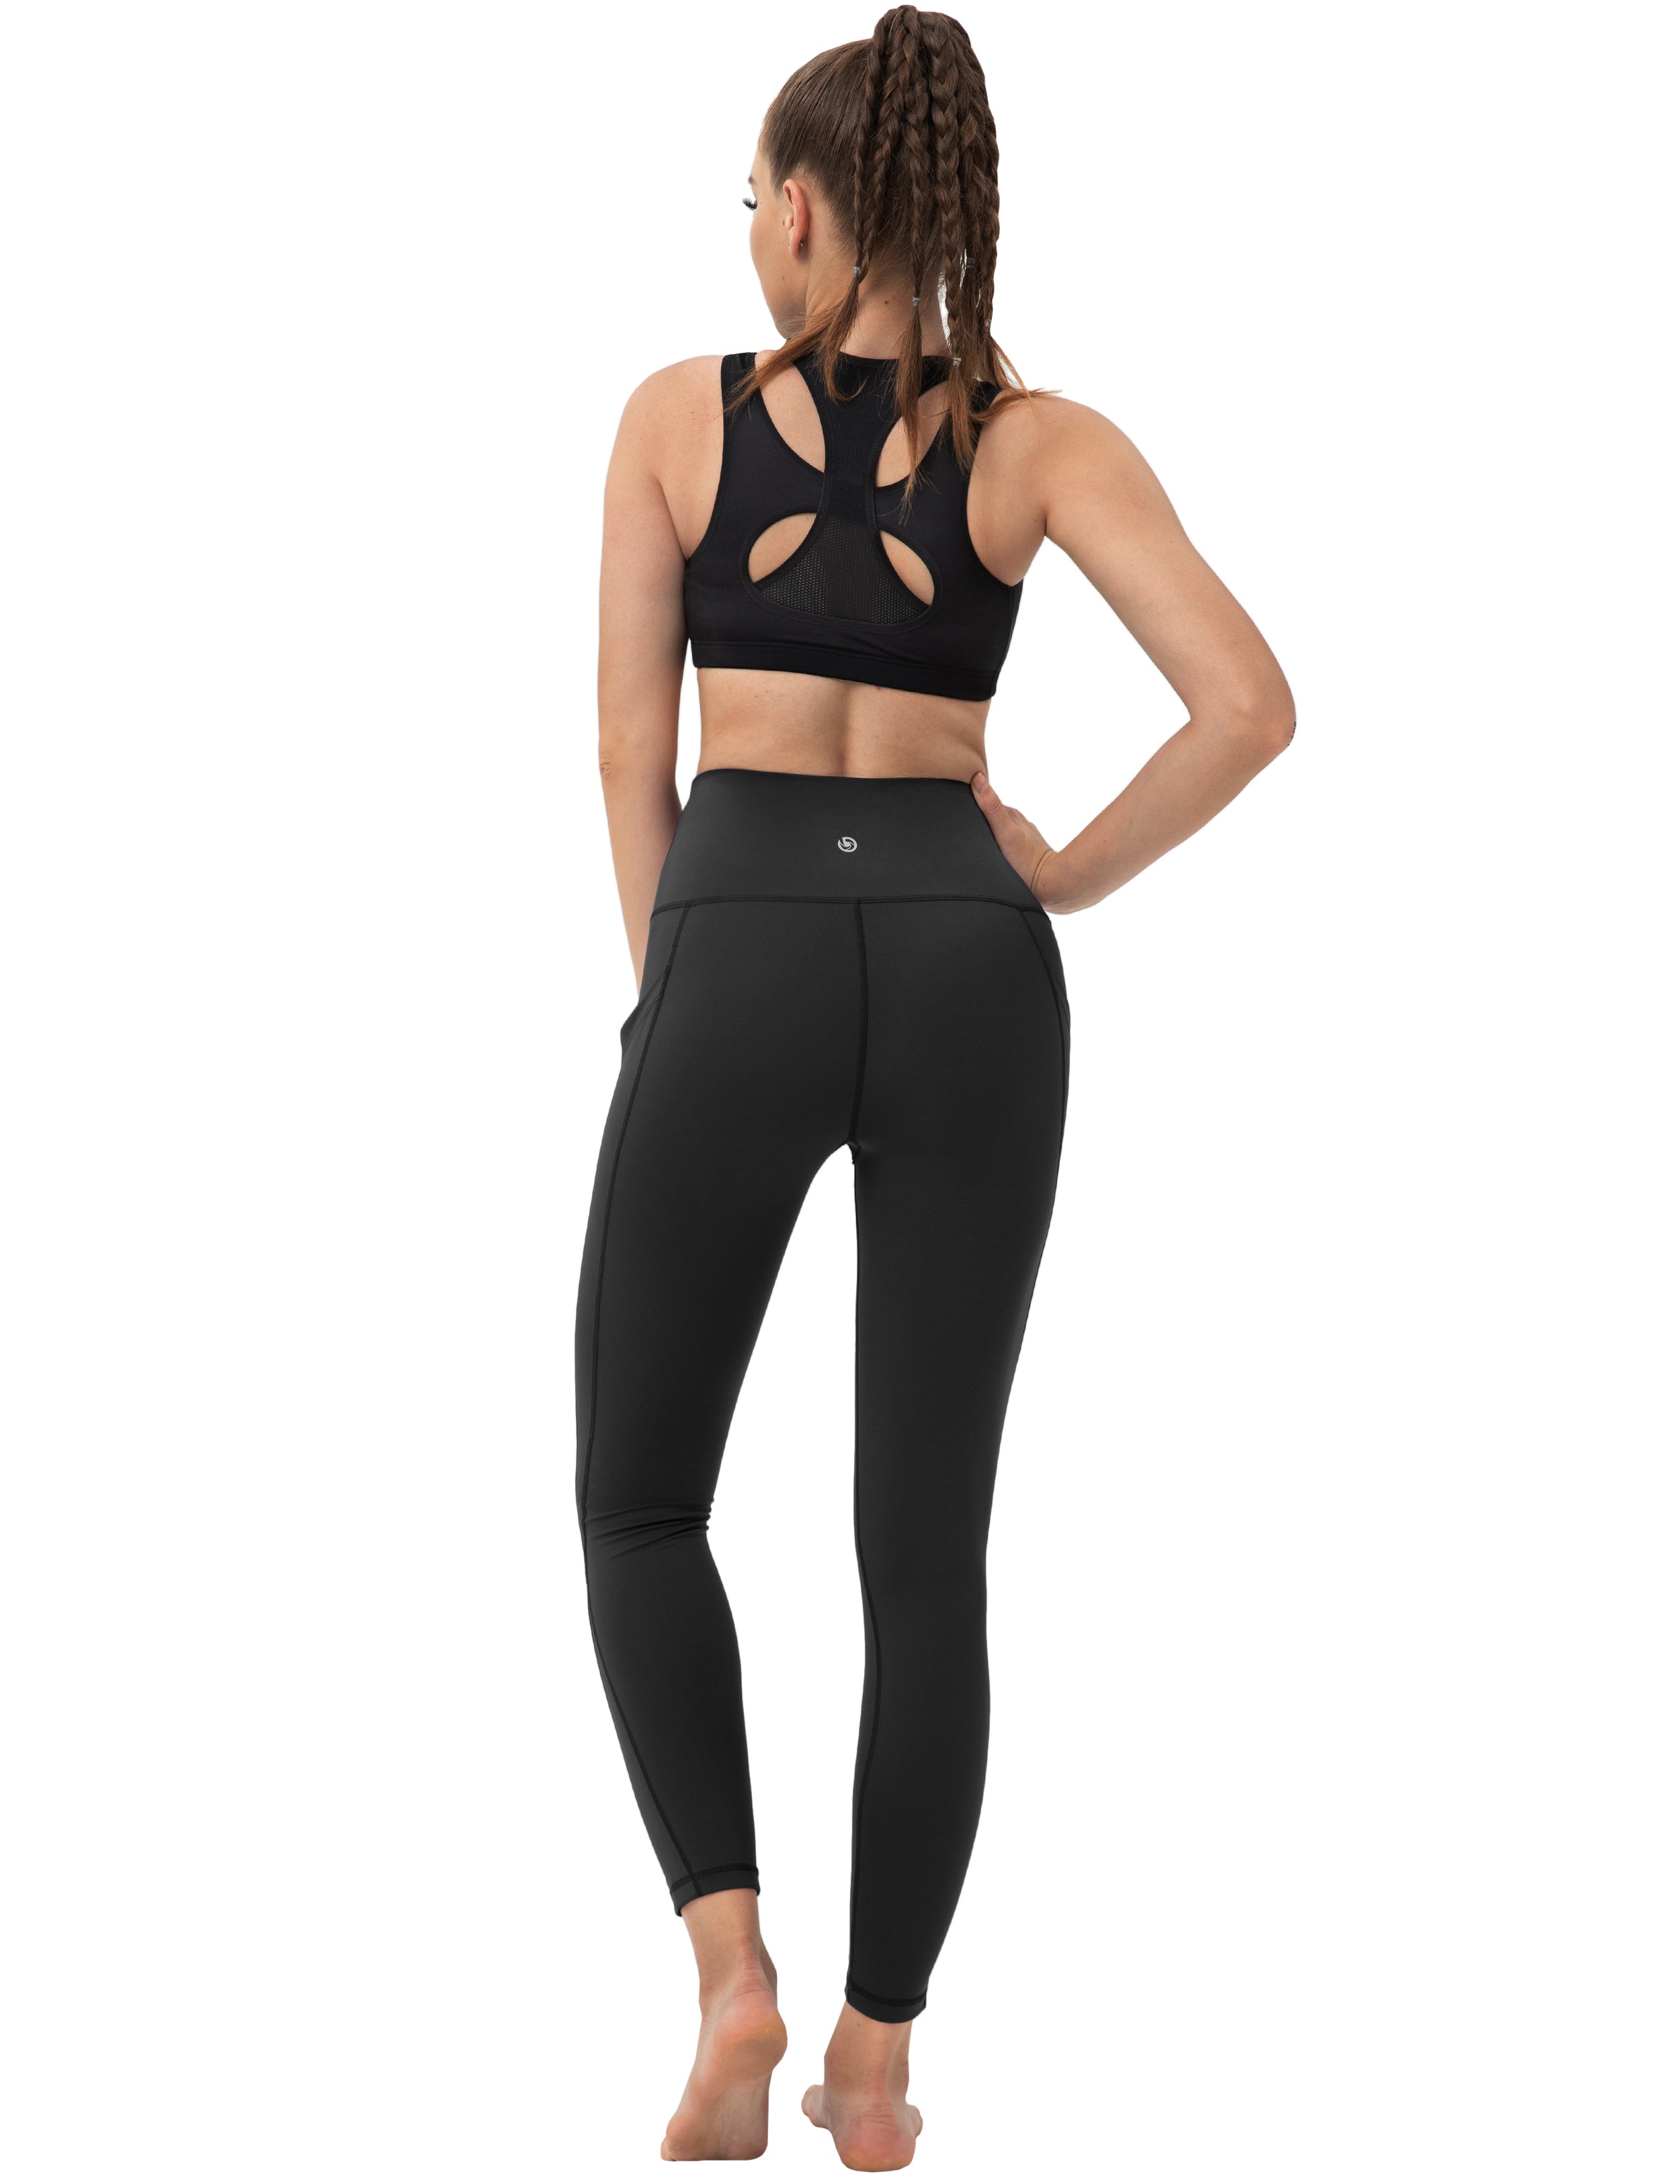 High Waist Side Pockets Gym Pants black 75% Nylon, 25% Spandex Fabric doesn't attract lint easily 4-way stretch No see-through Moisture-wicking Tummy control Inner pocket